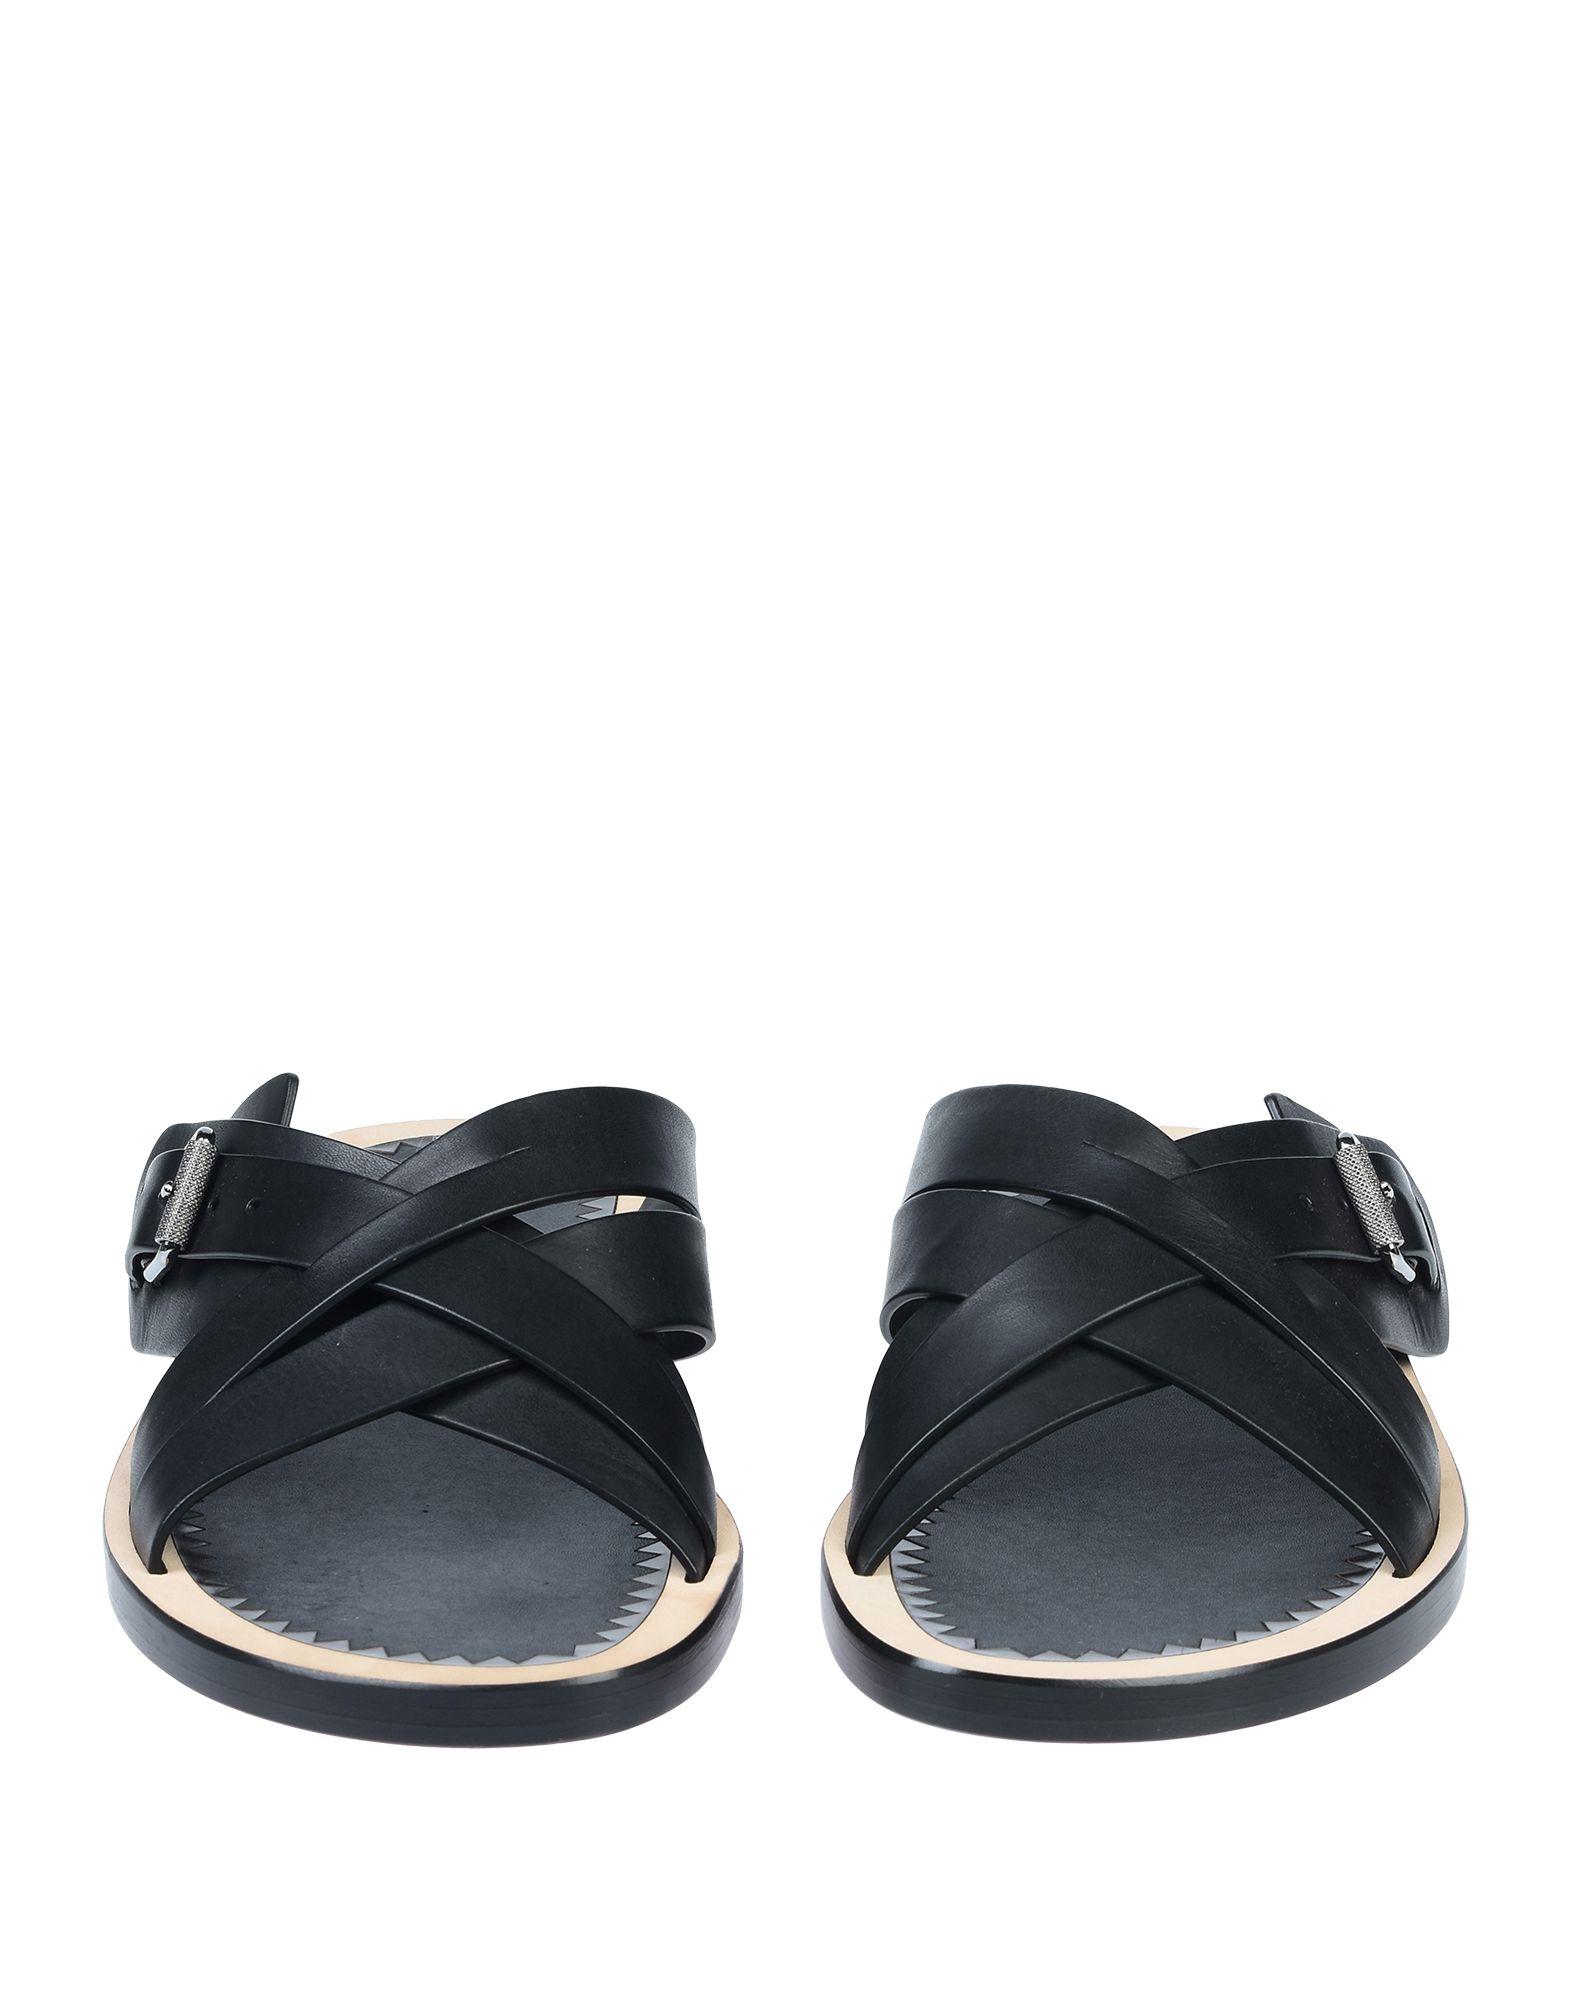 Christian Louboutin Leather Sandals in Black for Men - Lyst